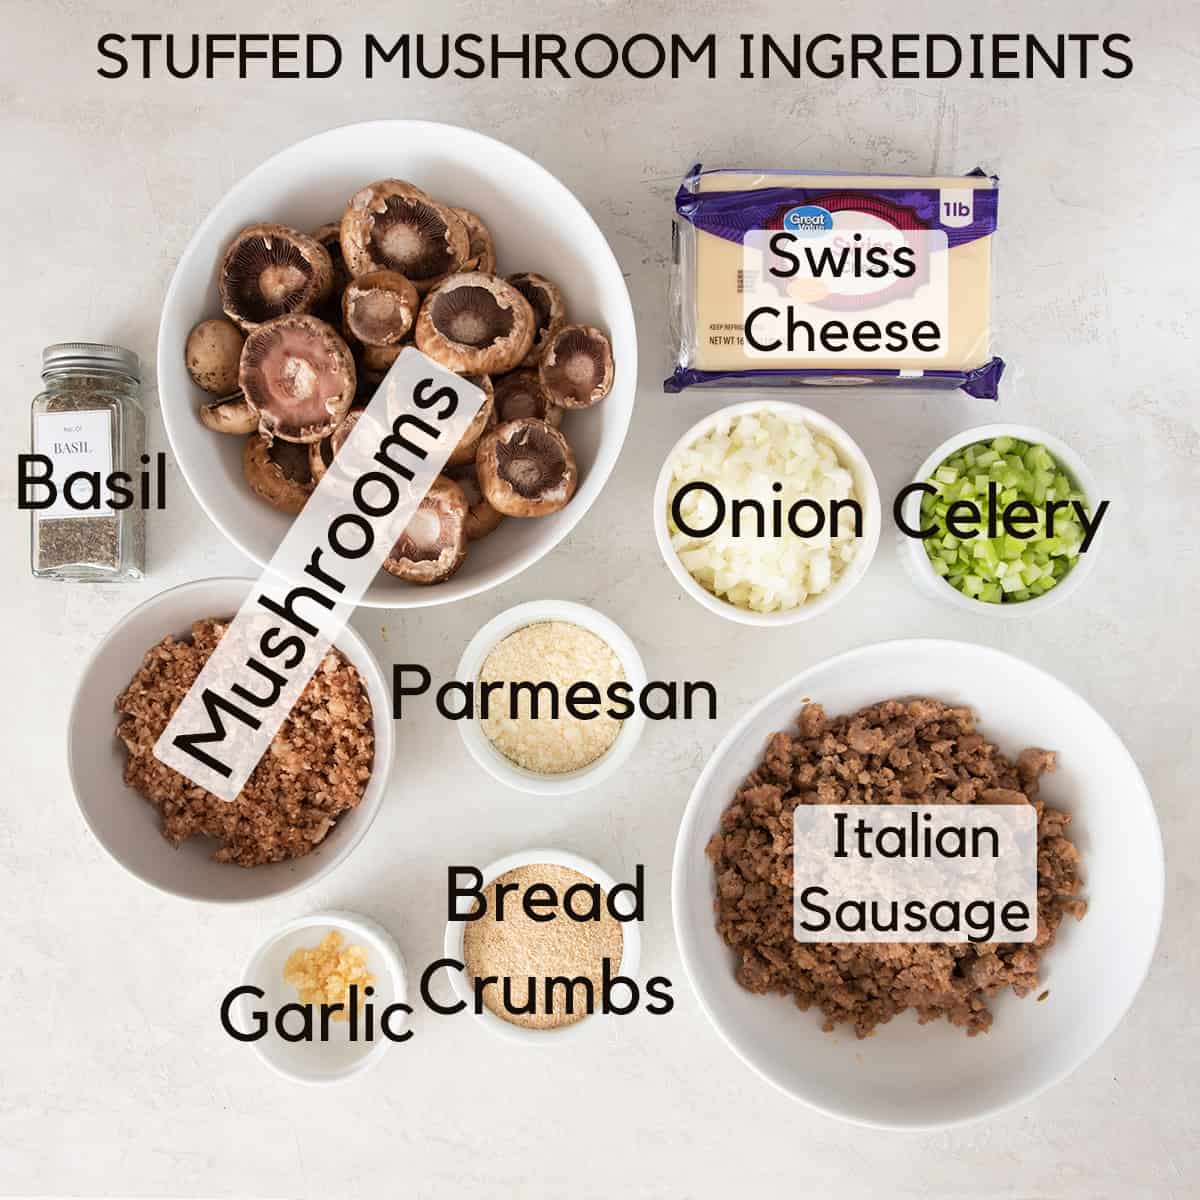 Stuffed mushroom recipe ingredients with text labels.